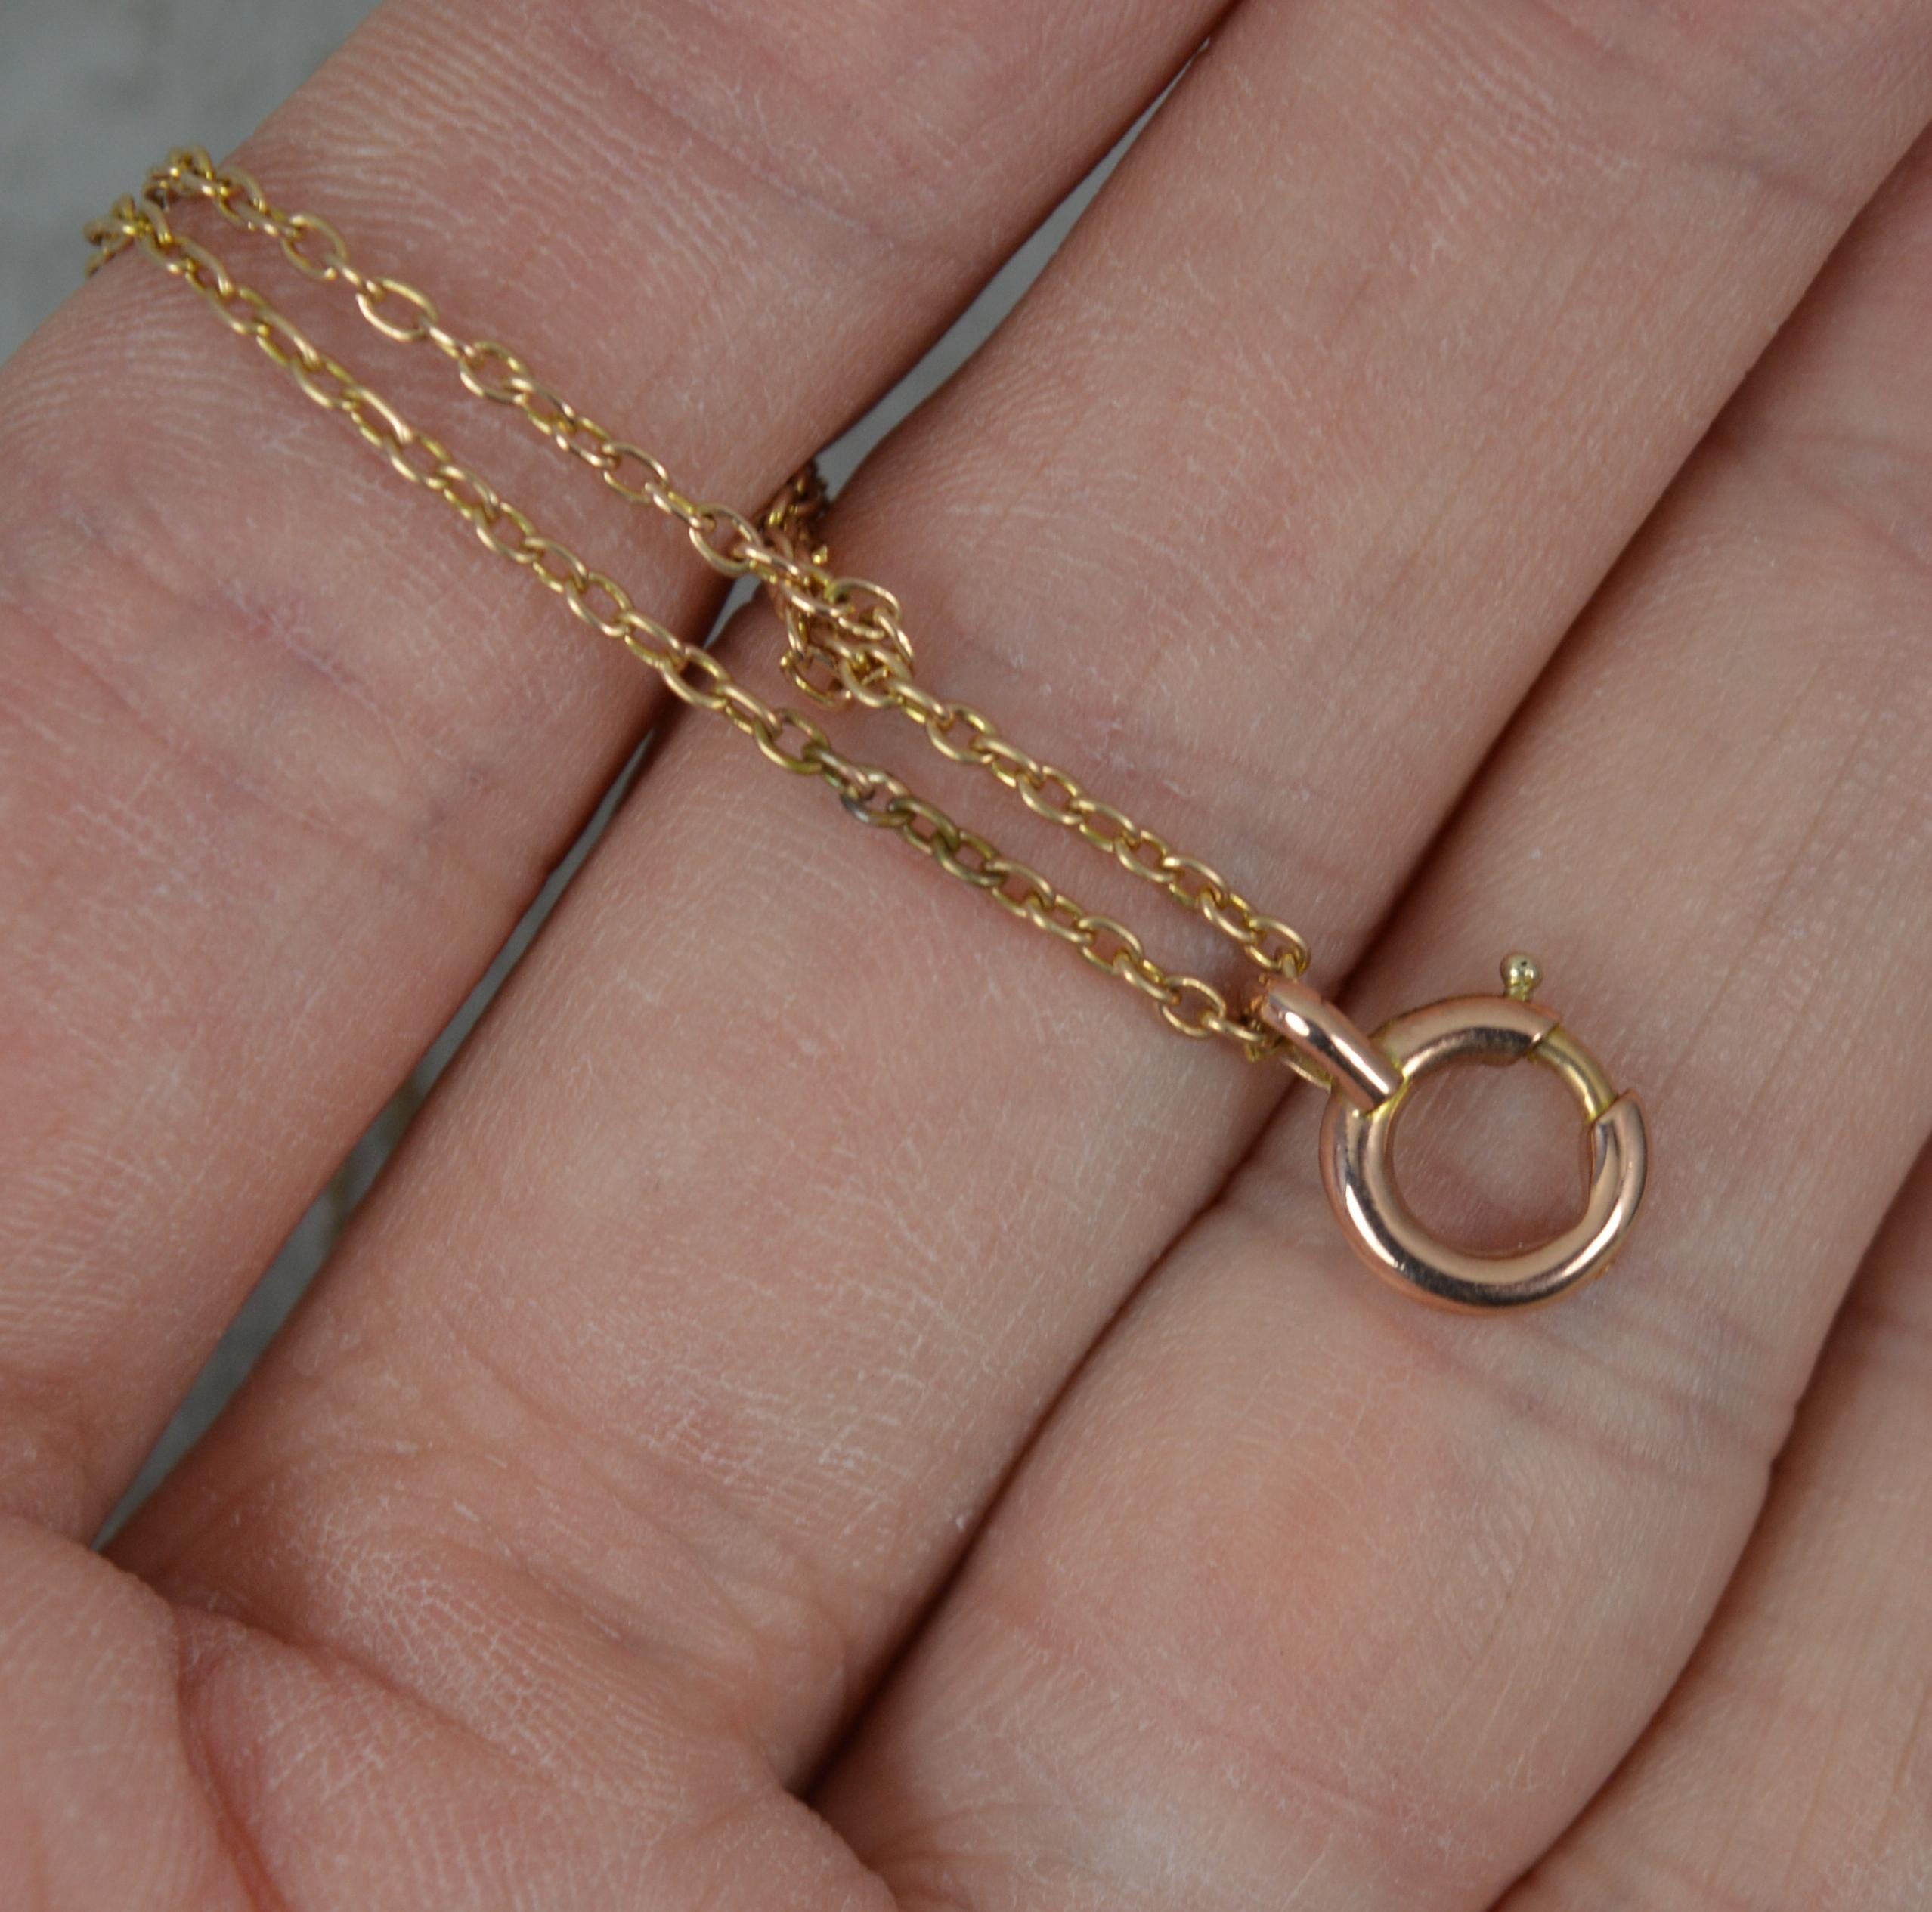 A rose gold guard chain.
Solid 9 carat rose gold belcher link example.
Good length and style.

Condition ; Very good for age. Working clasp. Light wear. Please view photographs.
Hallmarks ; unmarked, tests as 9ct
Size ; 55 inches, 1.3mm wide
Weight